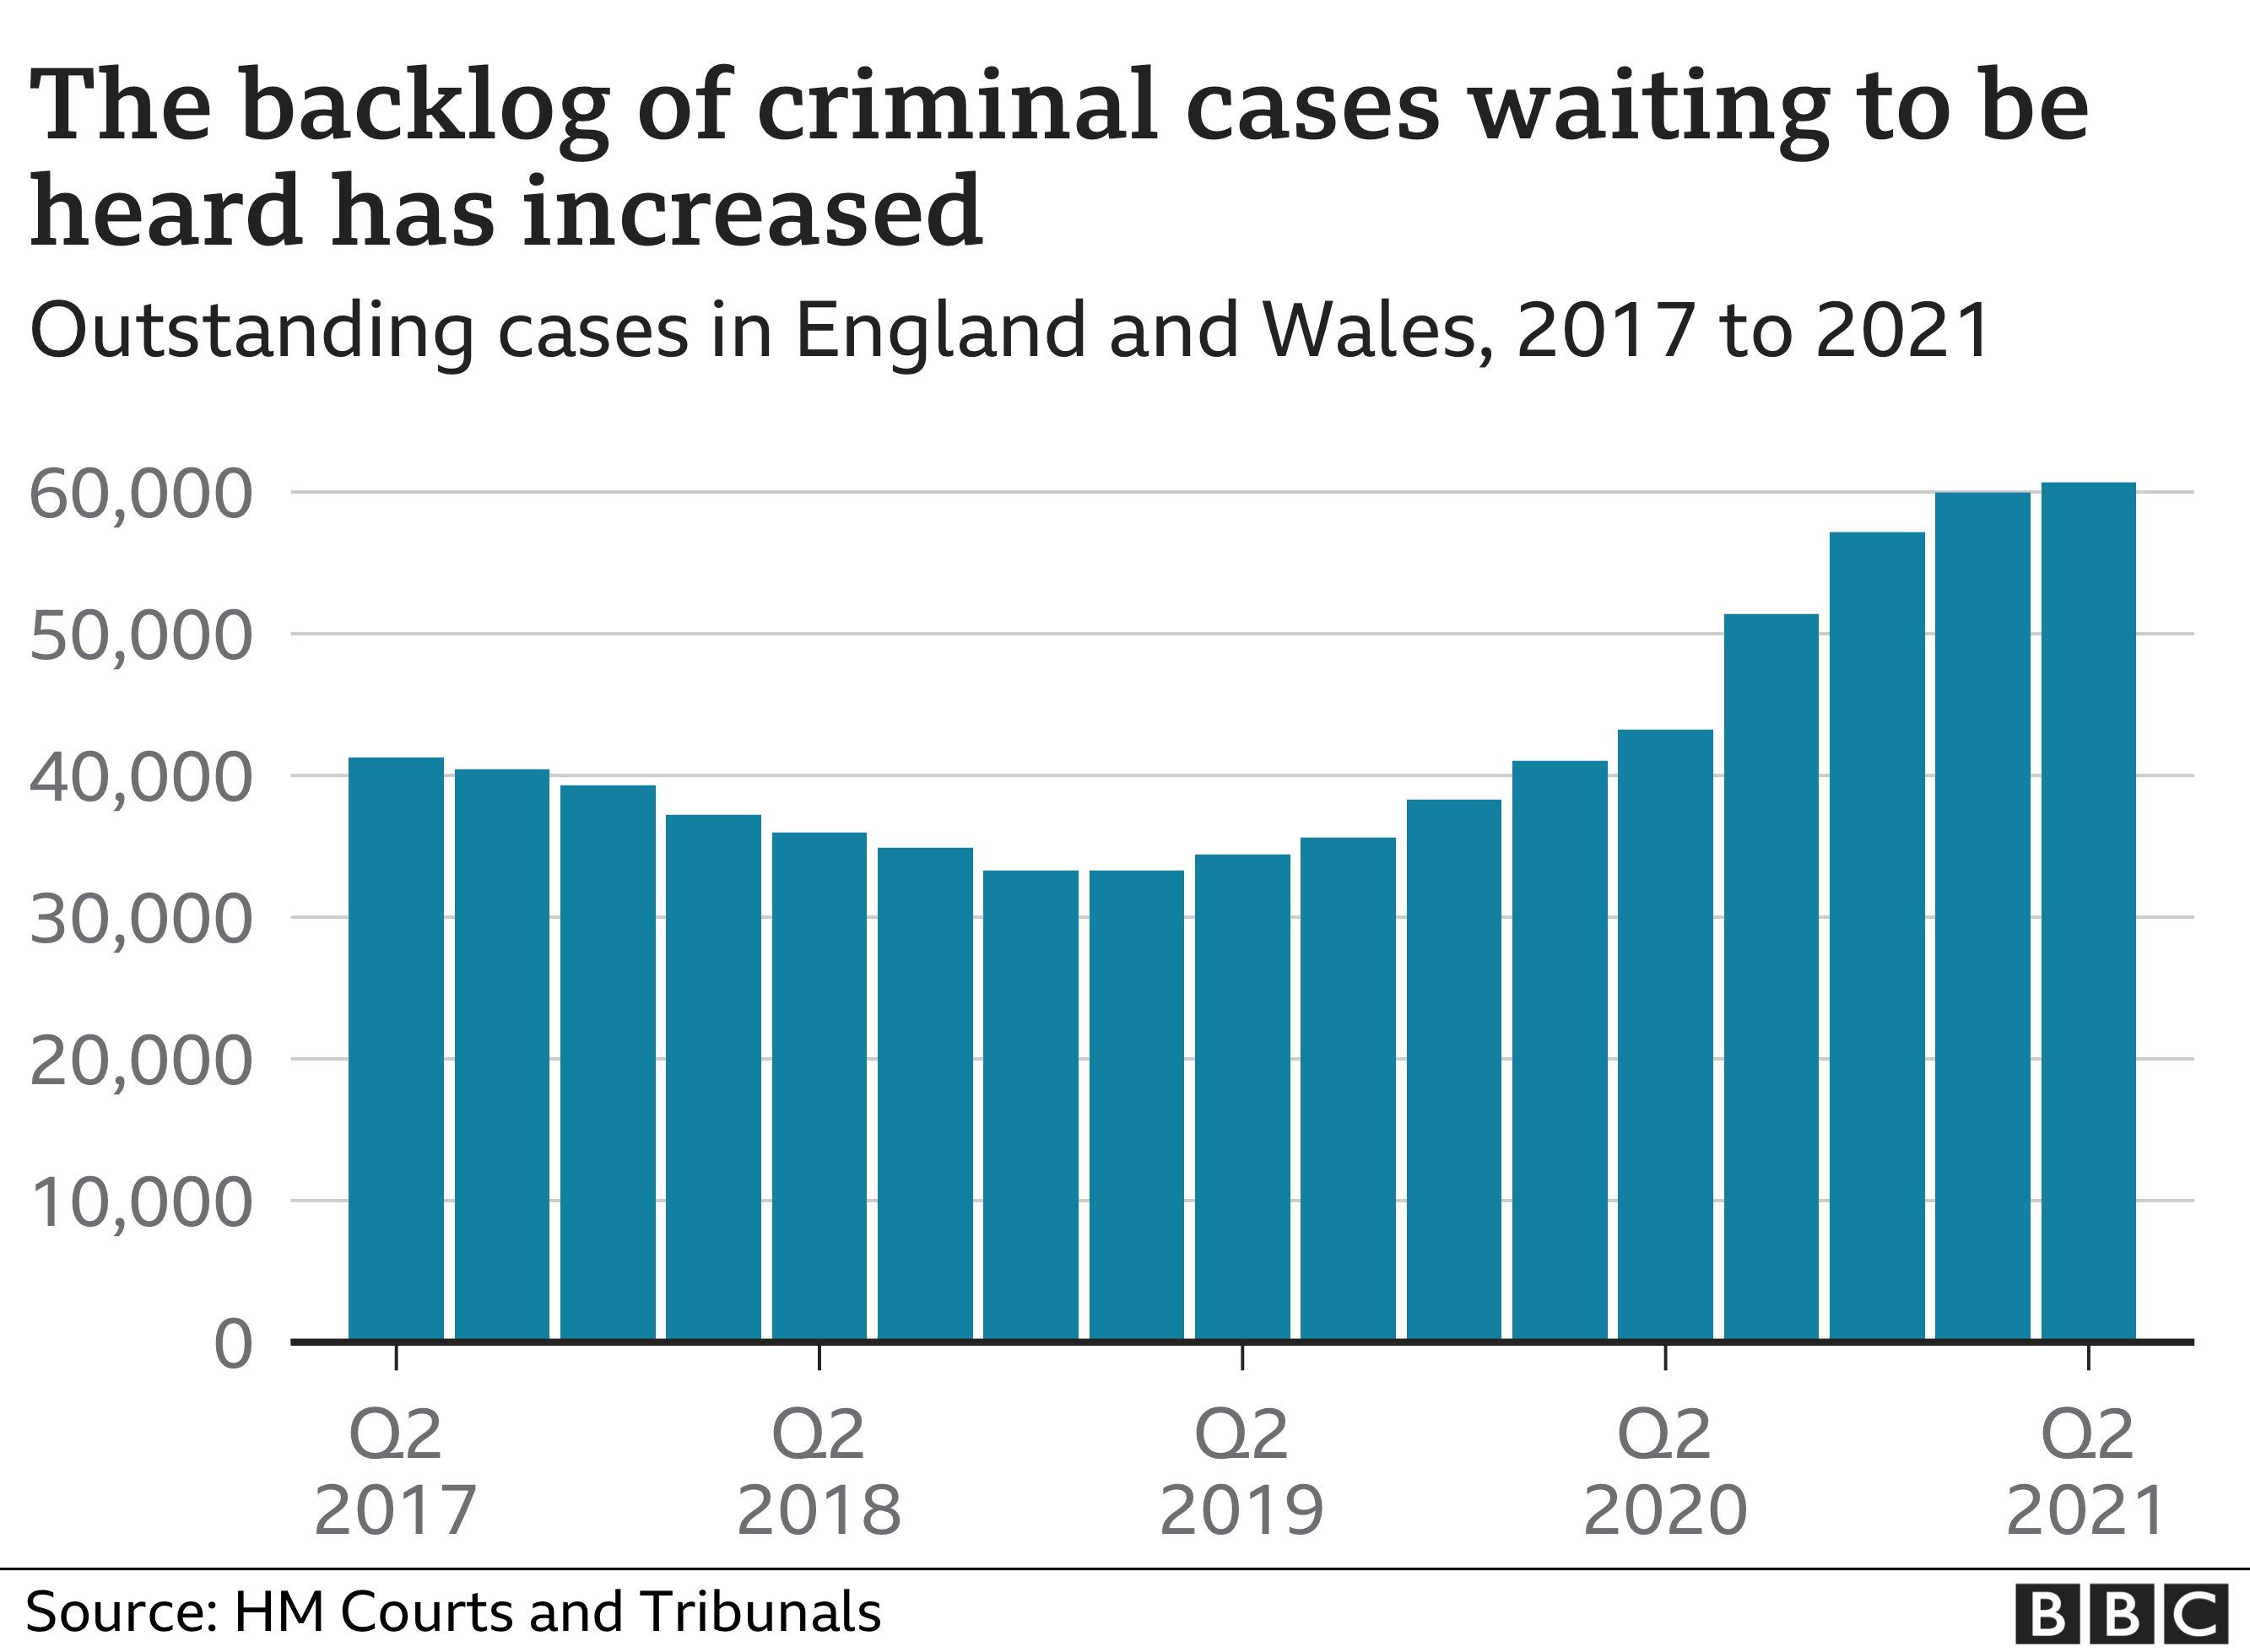 Chart showing the backlog of outstanding criminal cases in England and Wales 2017 to 2021